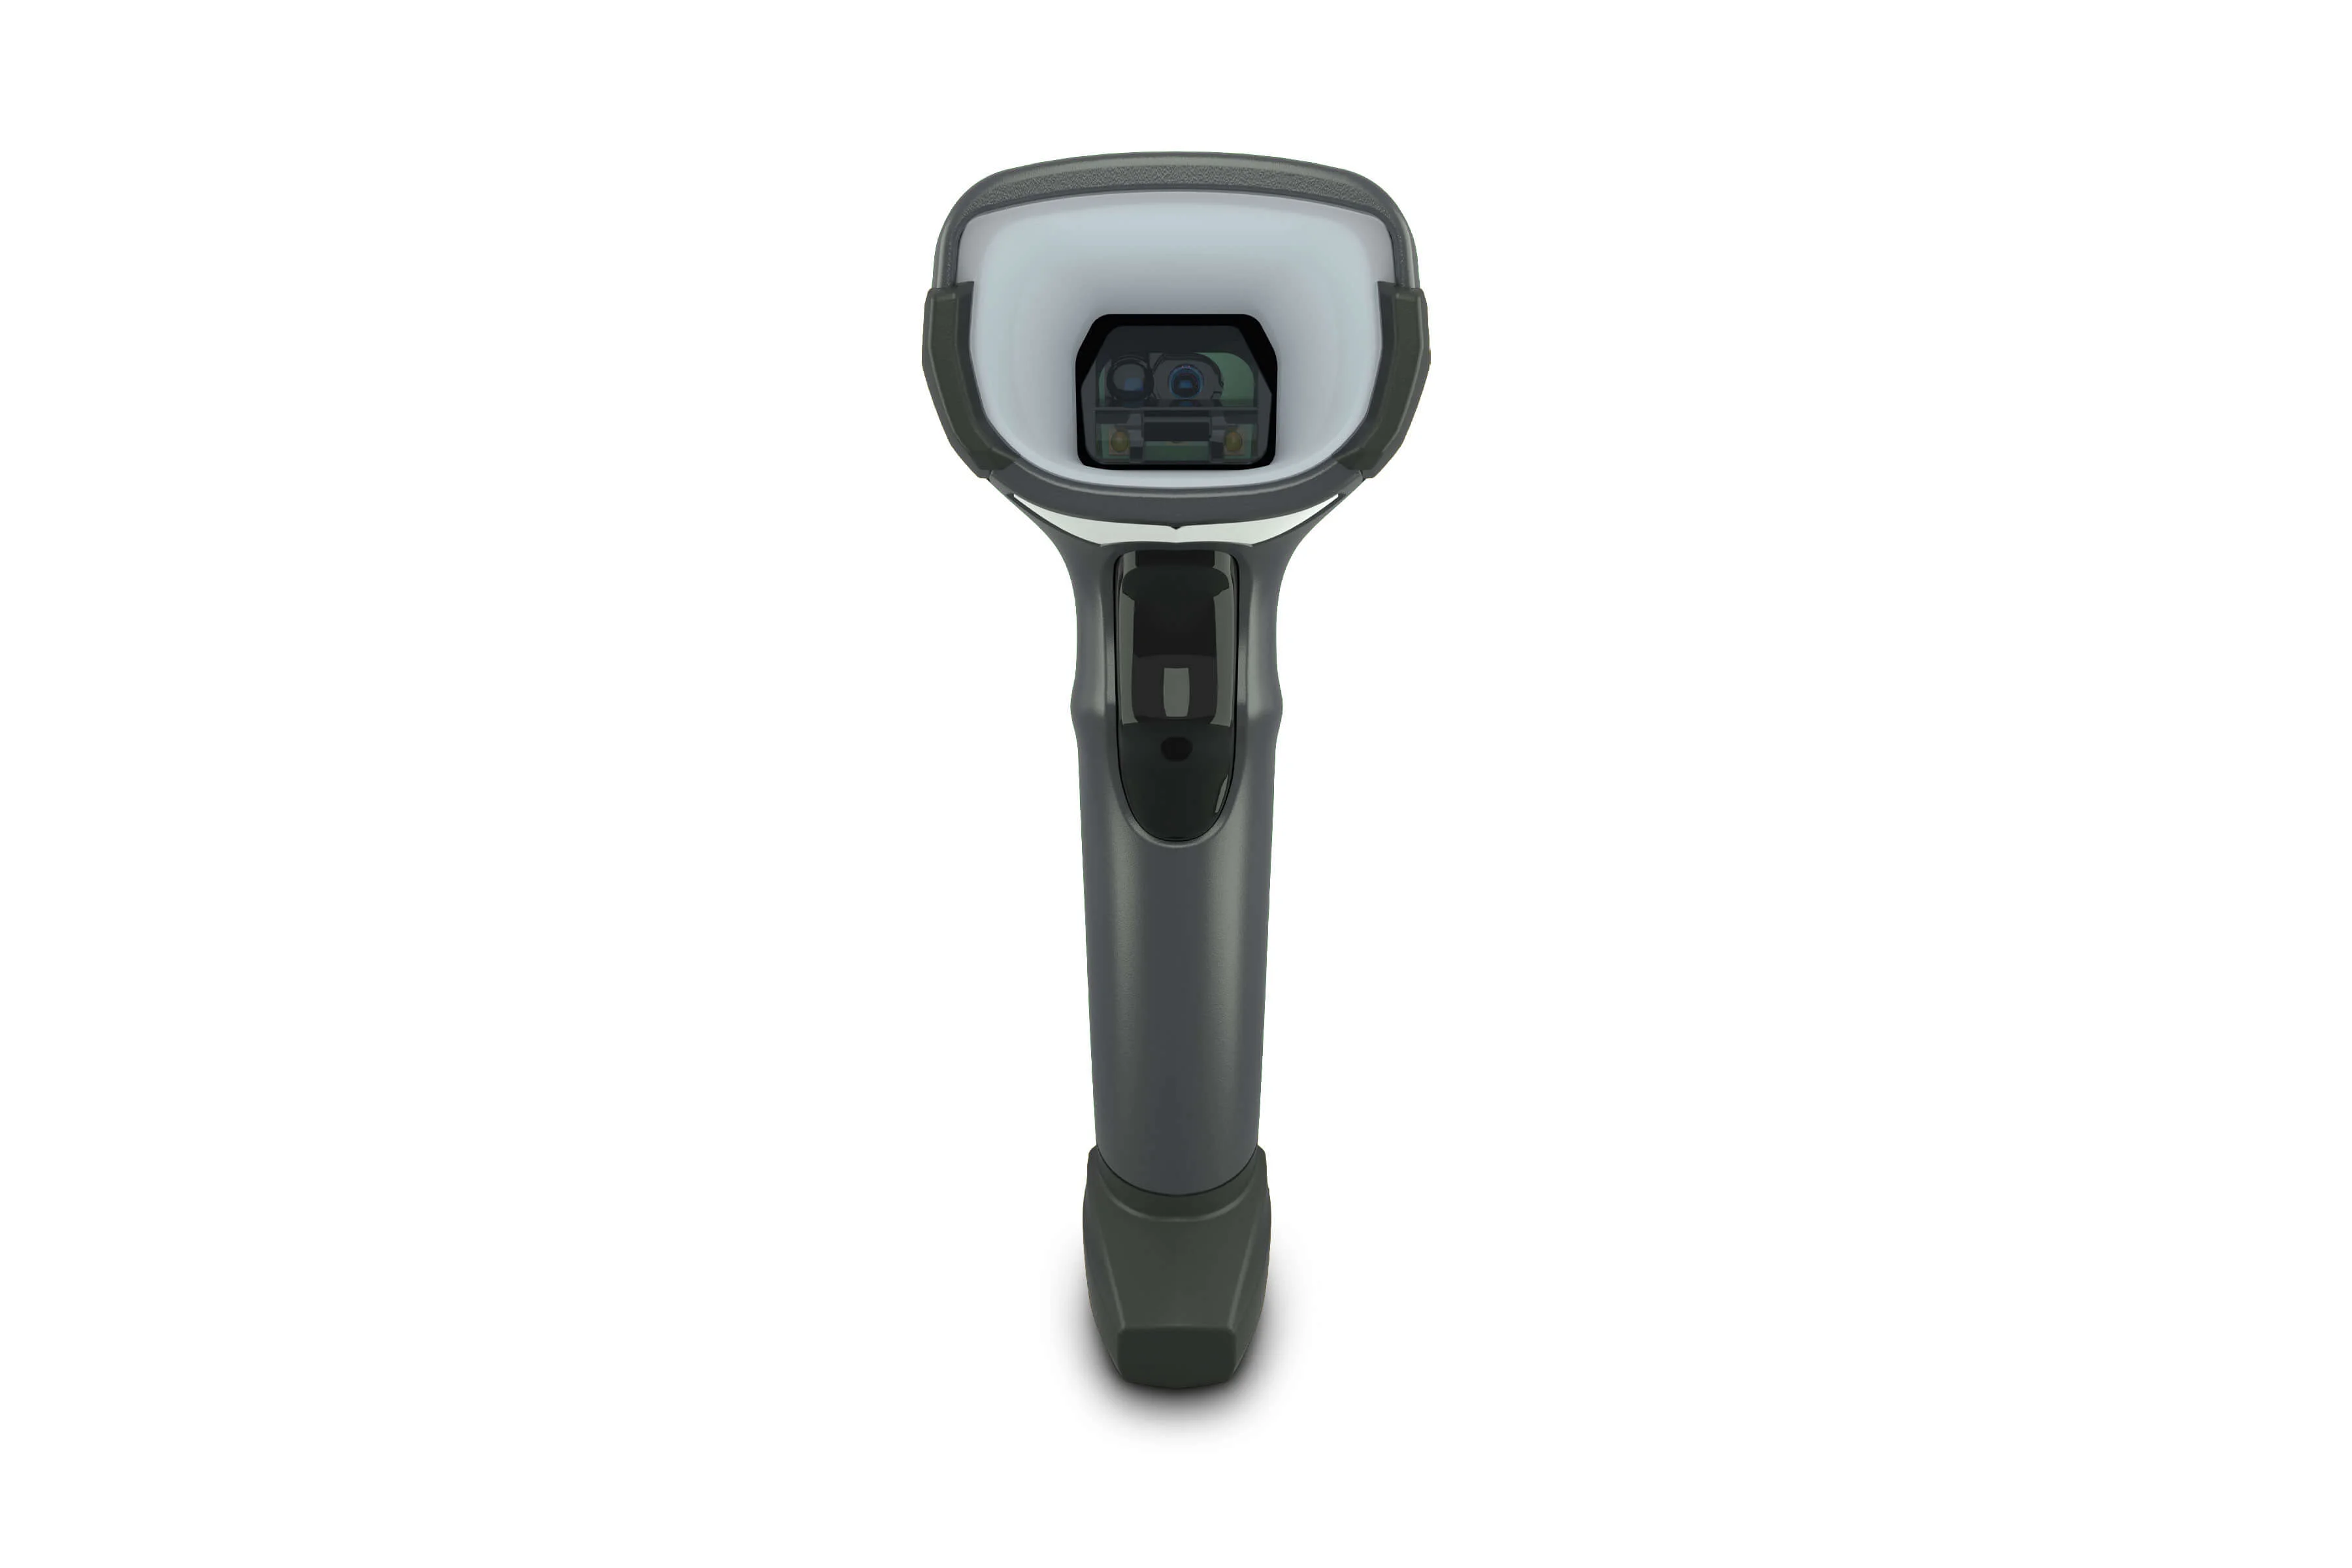 DS4600 Series 1D/2D Scanners